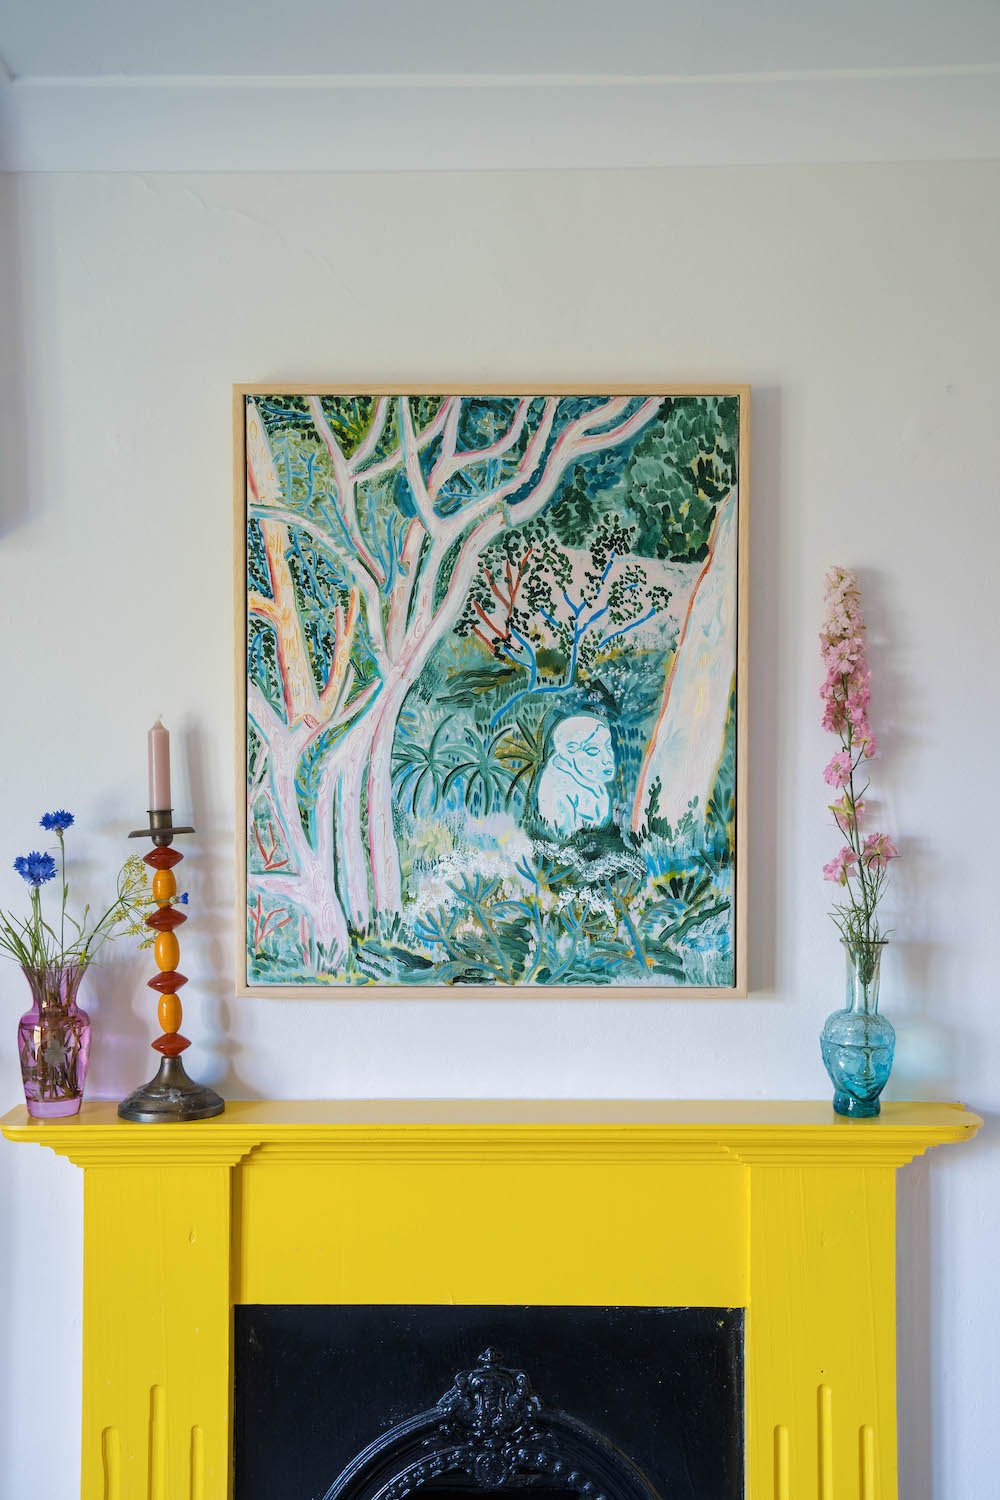 Colourful artwork by Camilla Perkins framed in birch moulding.